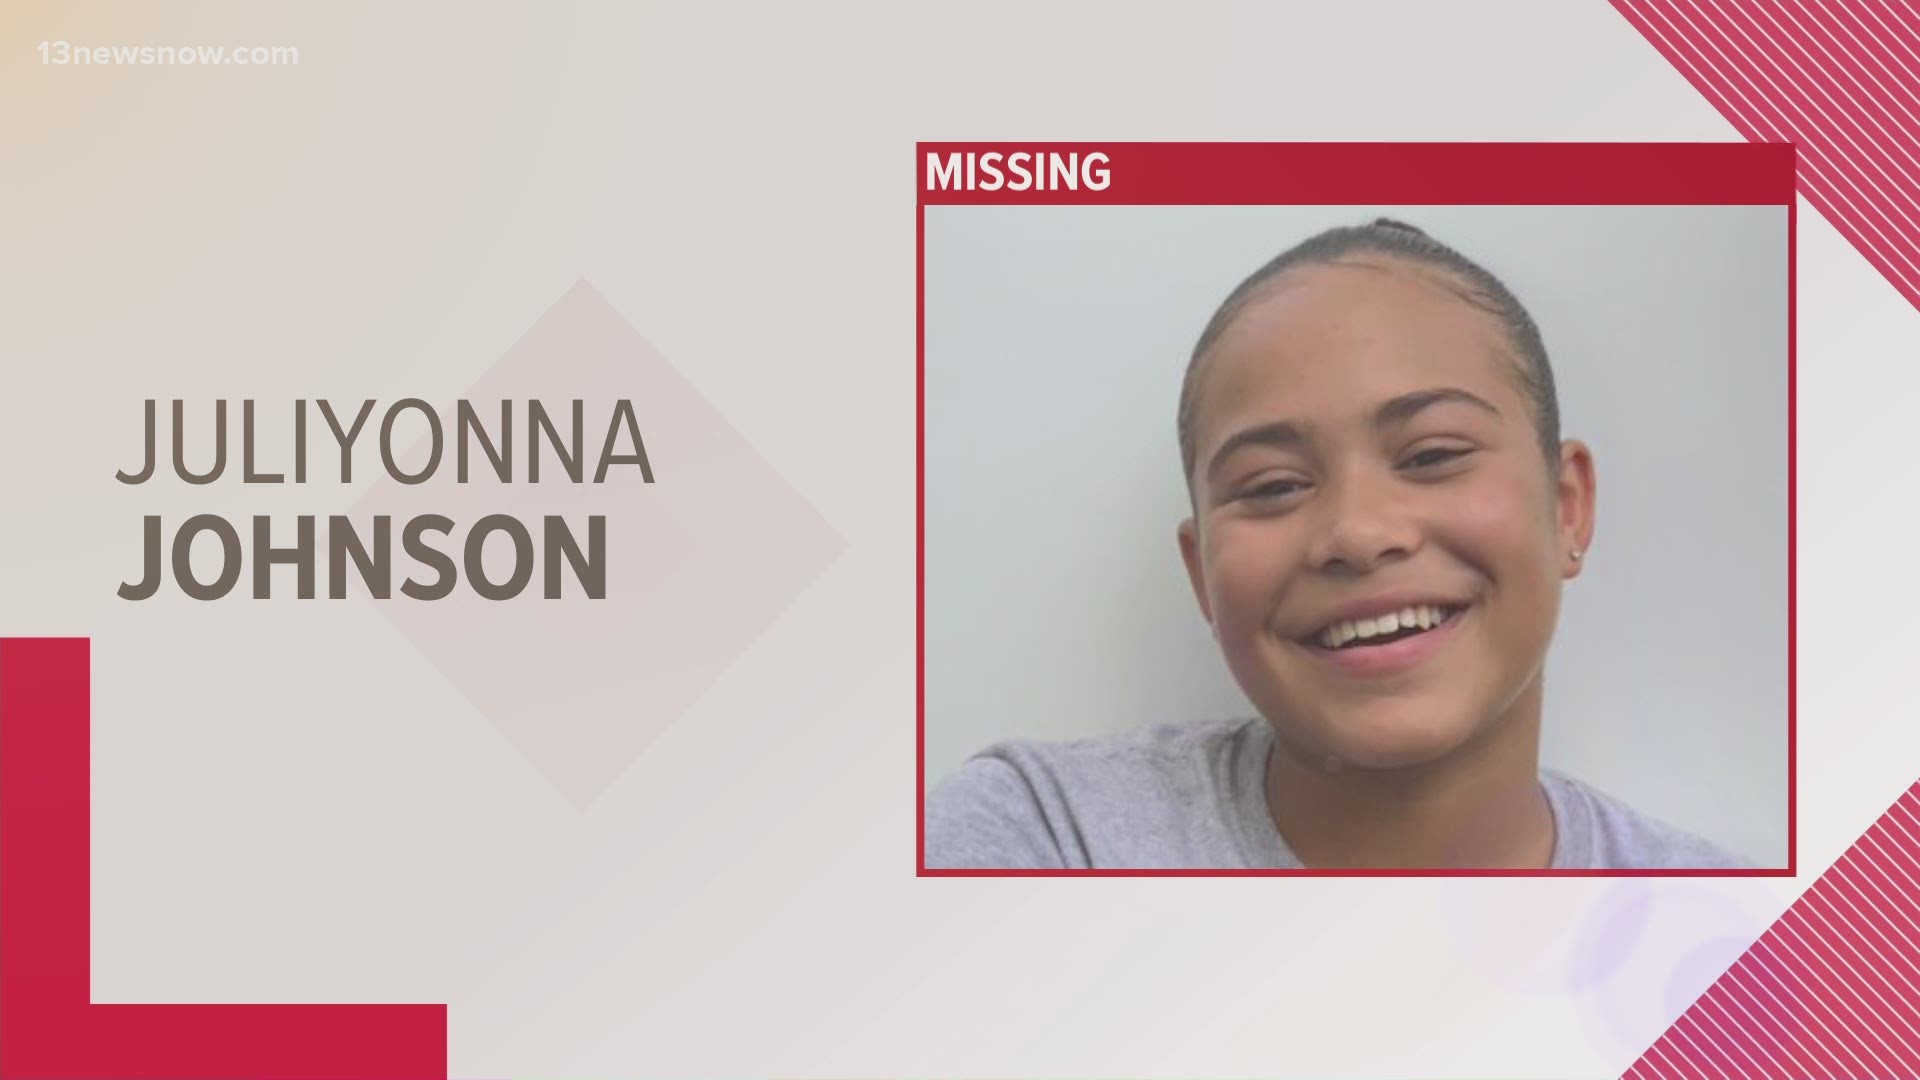 Juliyonna Johnson went missing on Simons Drive in Norfolk on August 9. Police ask anyone who knows anything about here whereabouts to call 911.